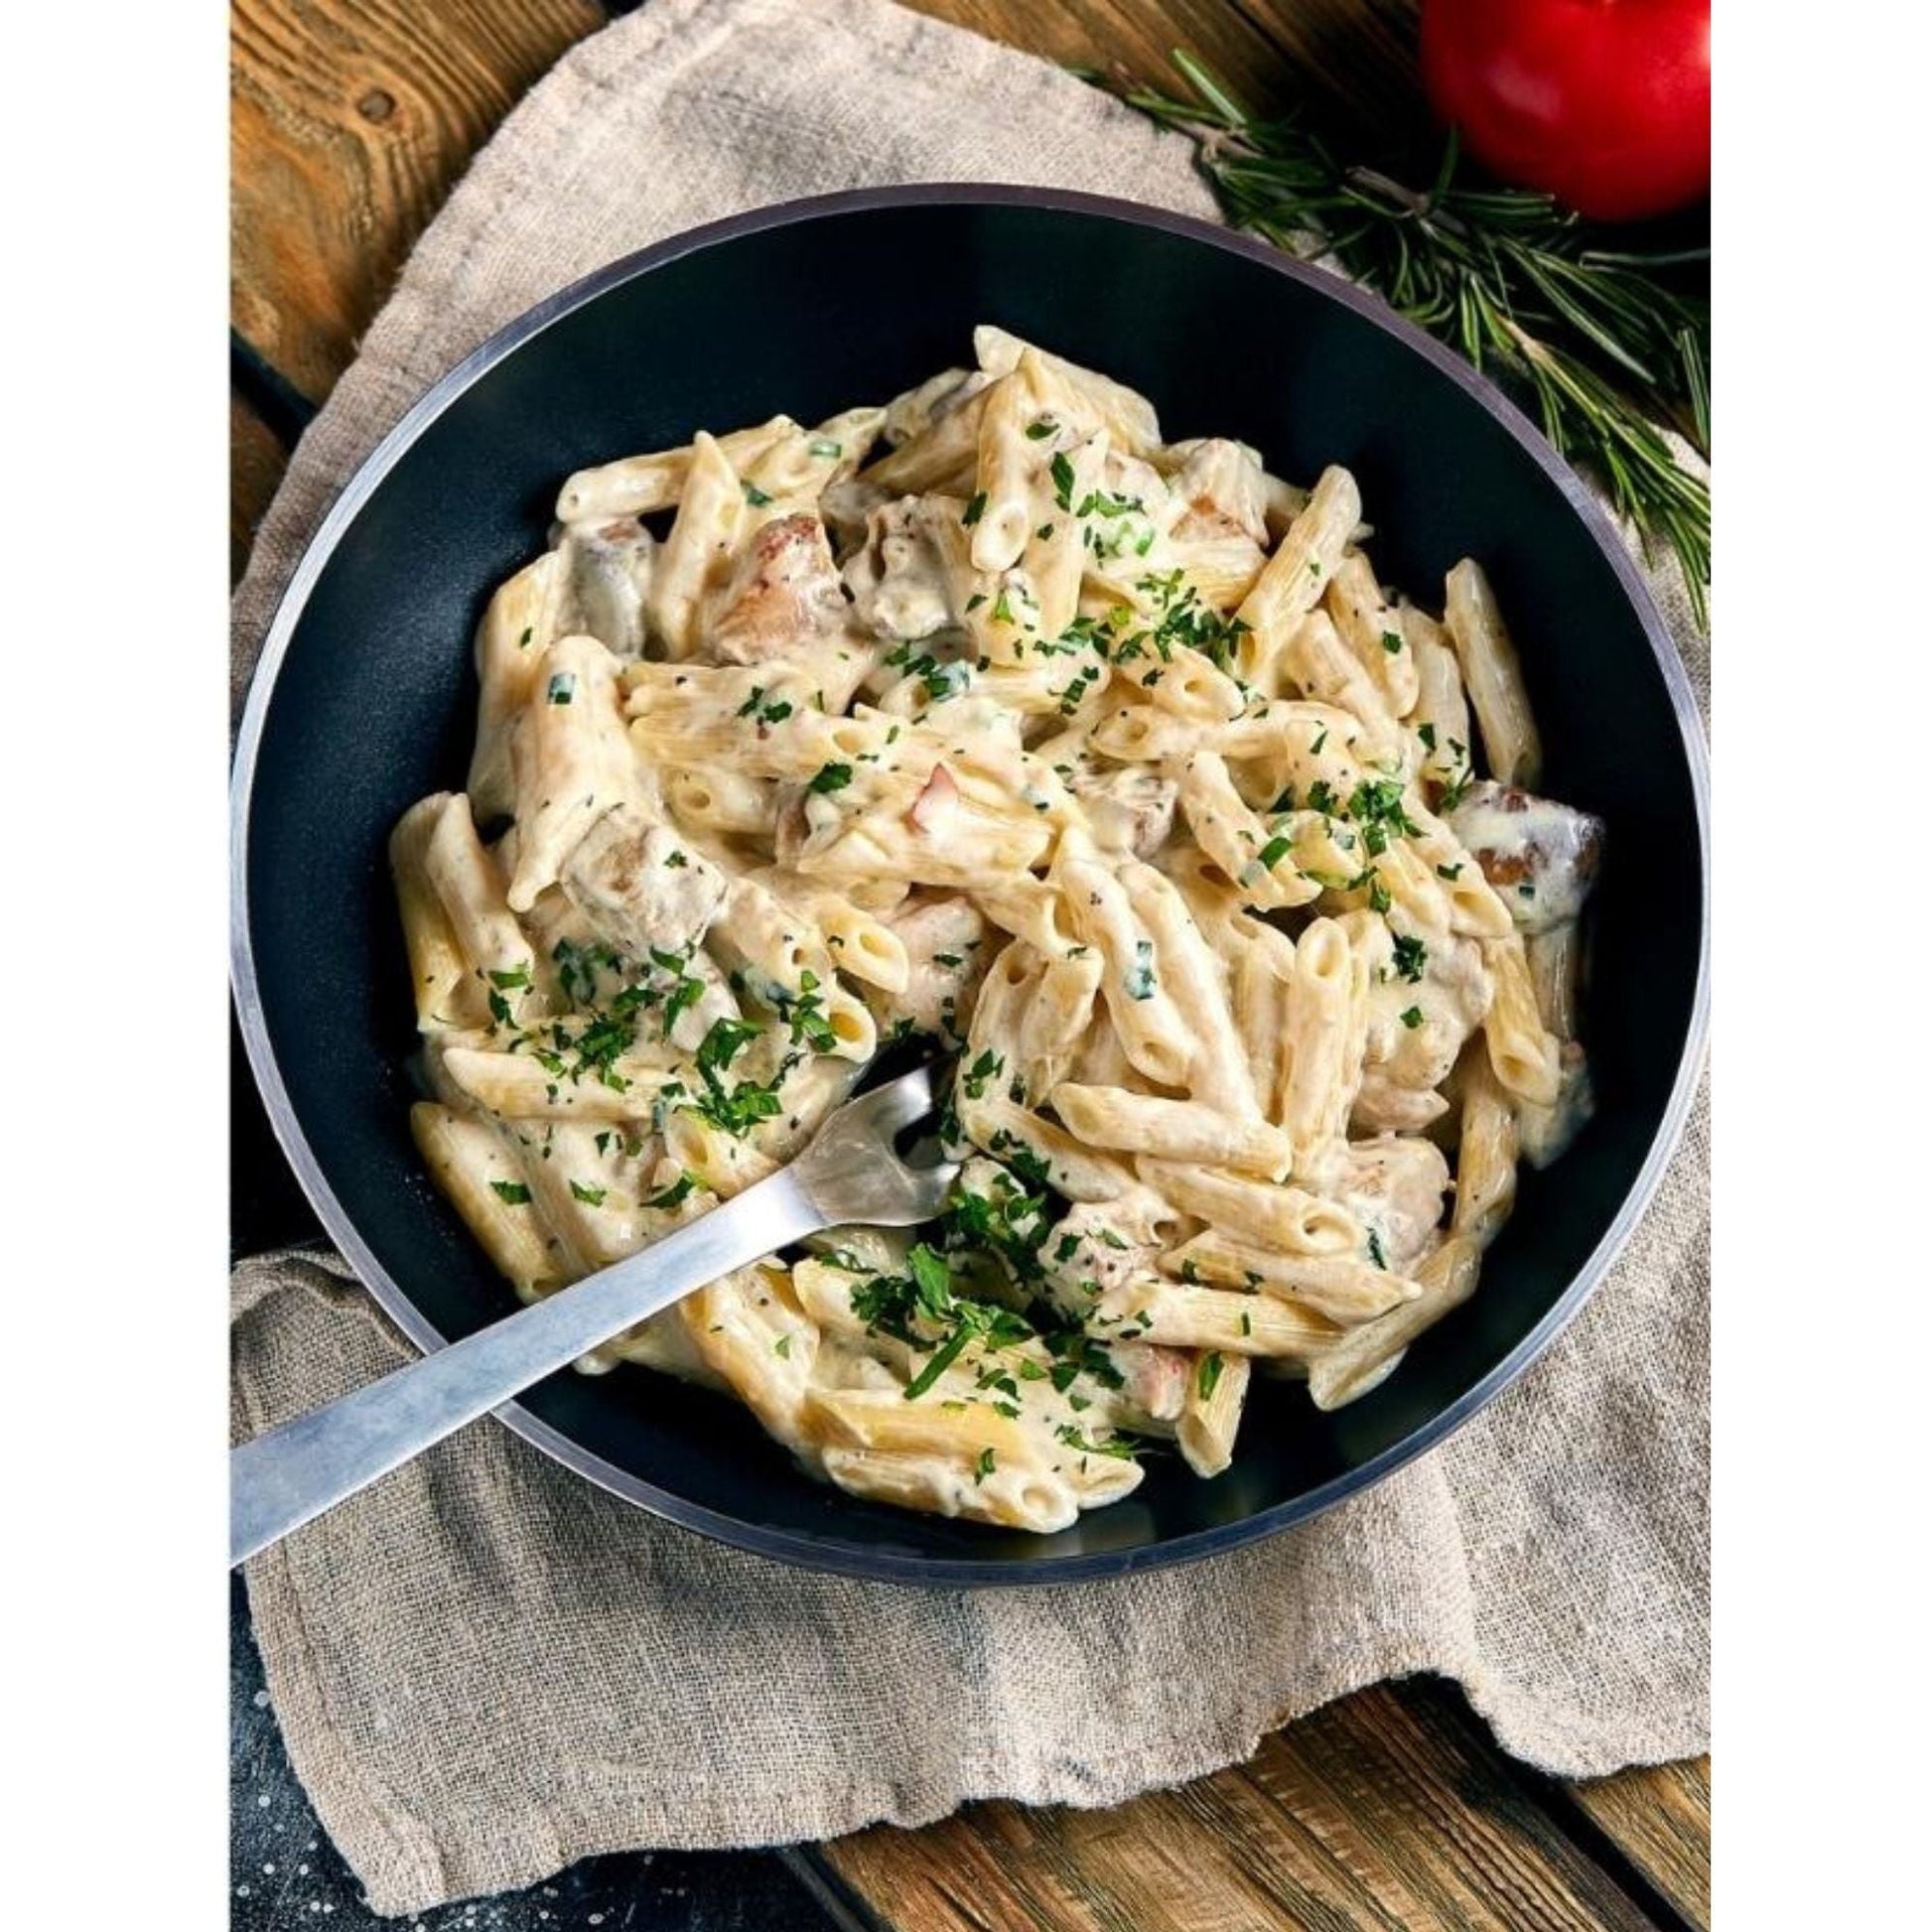 Easy Meal: Creamy chicken alfredo pasta with skillet meal.